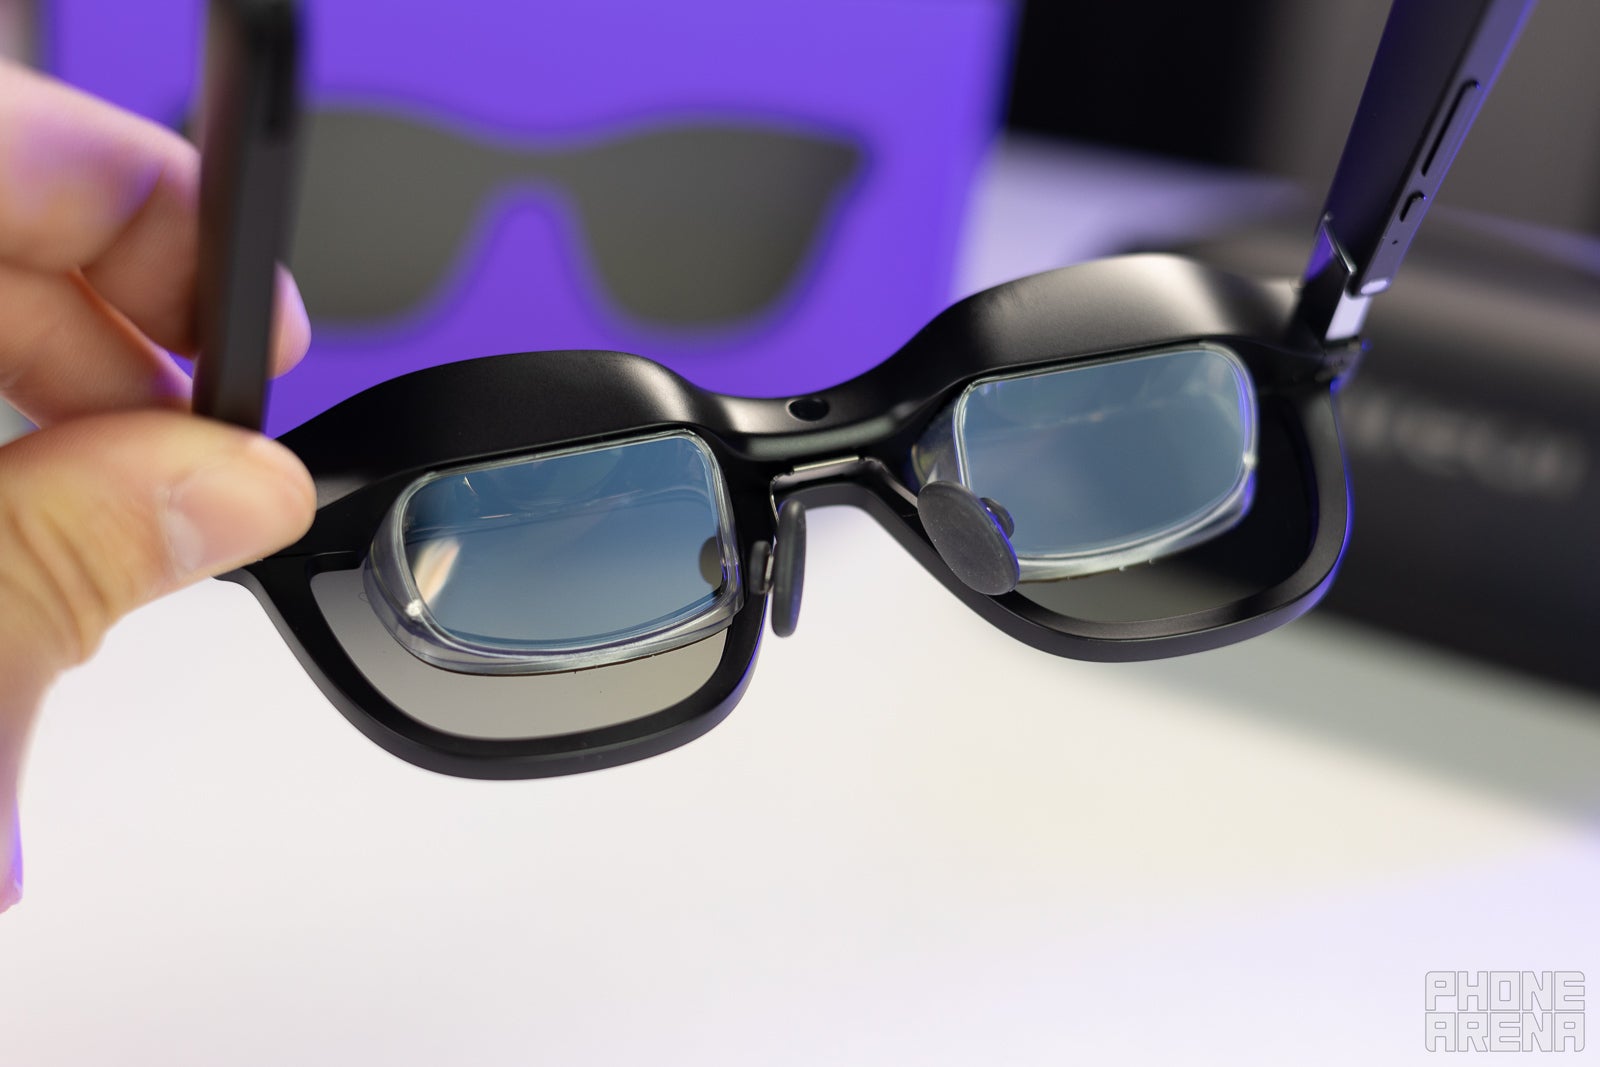 (Image Credit - PhoneArena) Xreal Air lenses - Xreal Air review: Experiencing our bright AR future, today